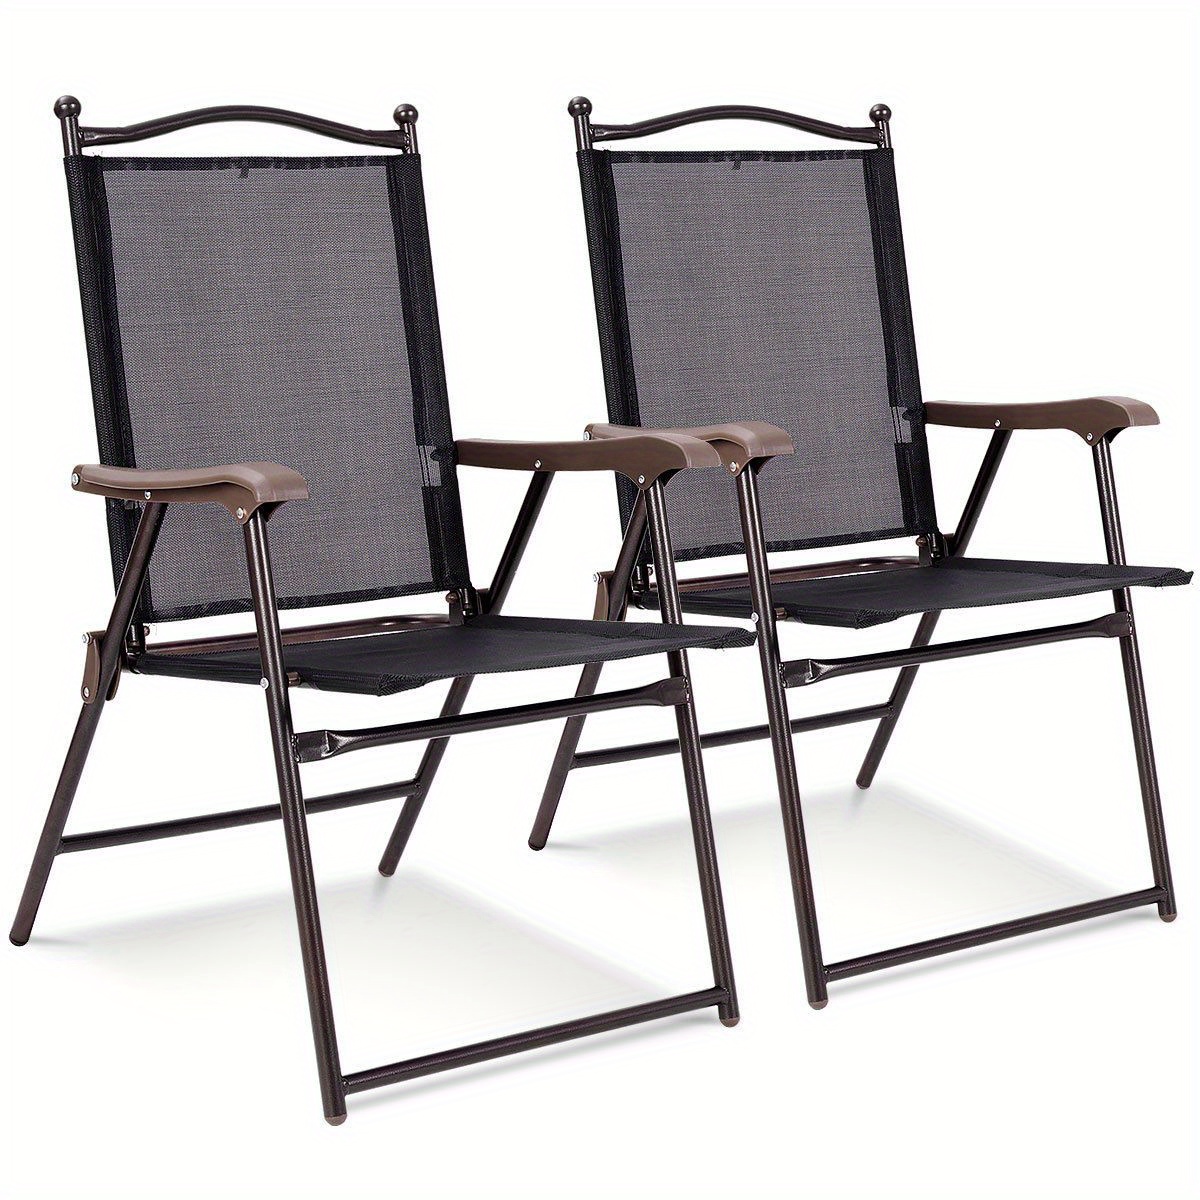 

Lifezeal Set Of 2 Patio Folding Sling Back Chairs Camping Deck Garden Pool Beach Black